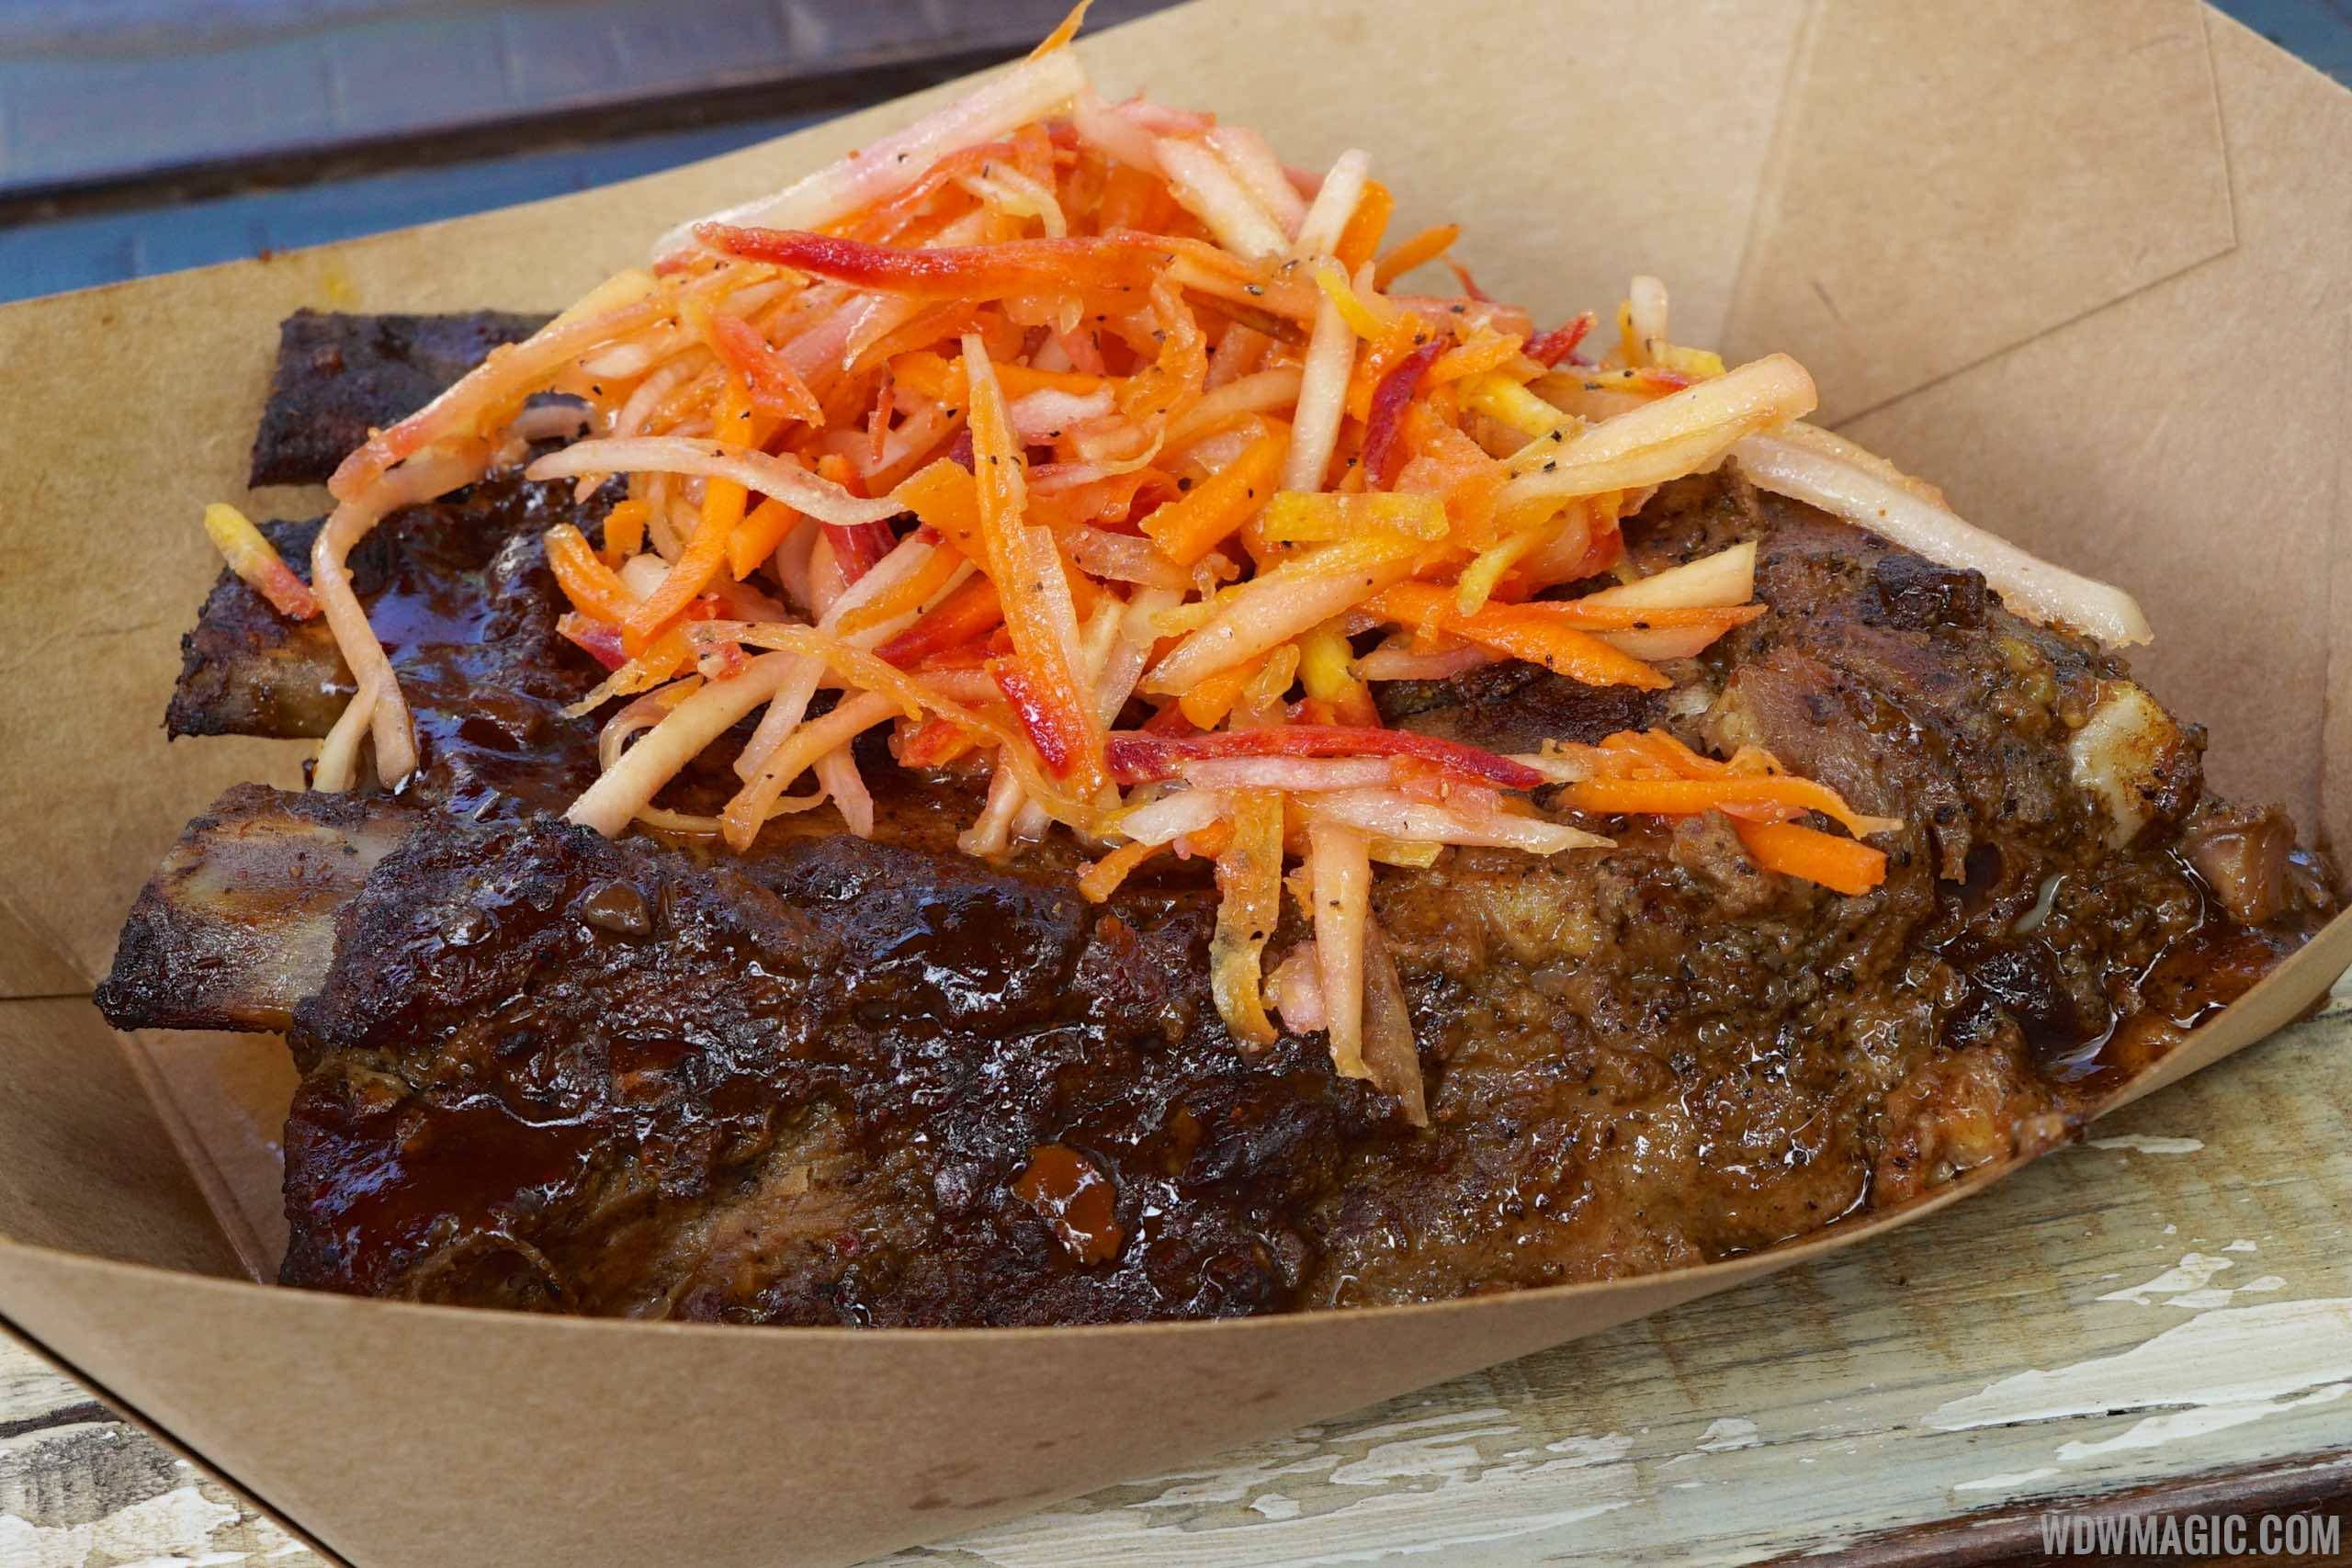 Harambe Market Food - Spice-rubbed Karubi Ribs with green papaya-carrot slaw and a chickpea cucumber and tomato salad $13.39